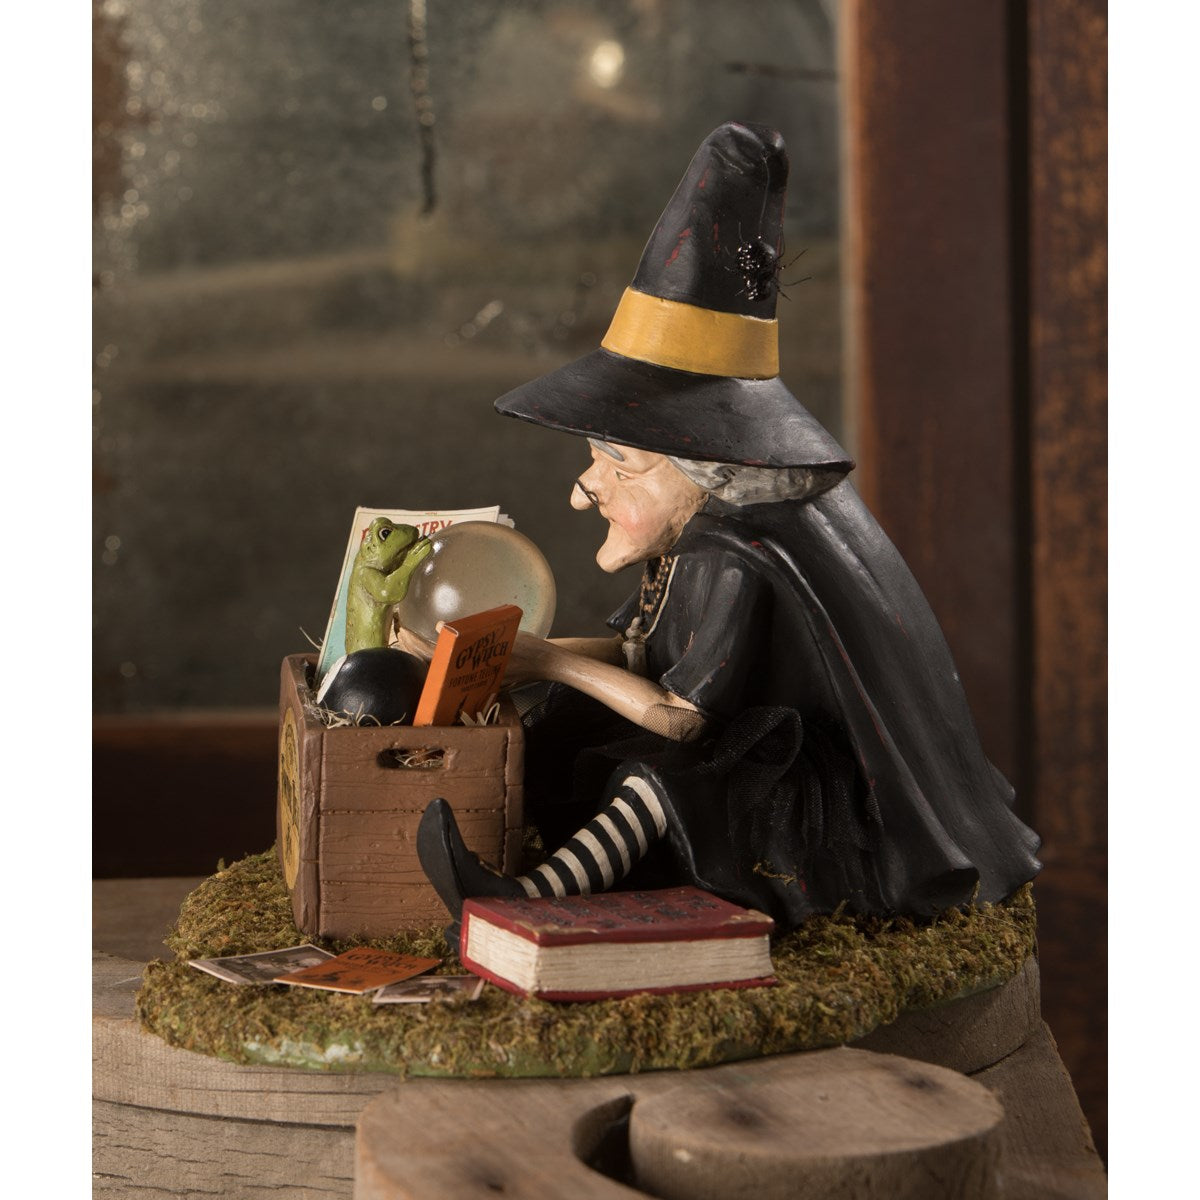 Bethany Lowe Diy Fortune Tellers Kit Witch Figurine